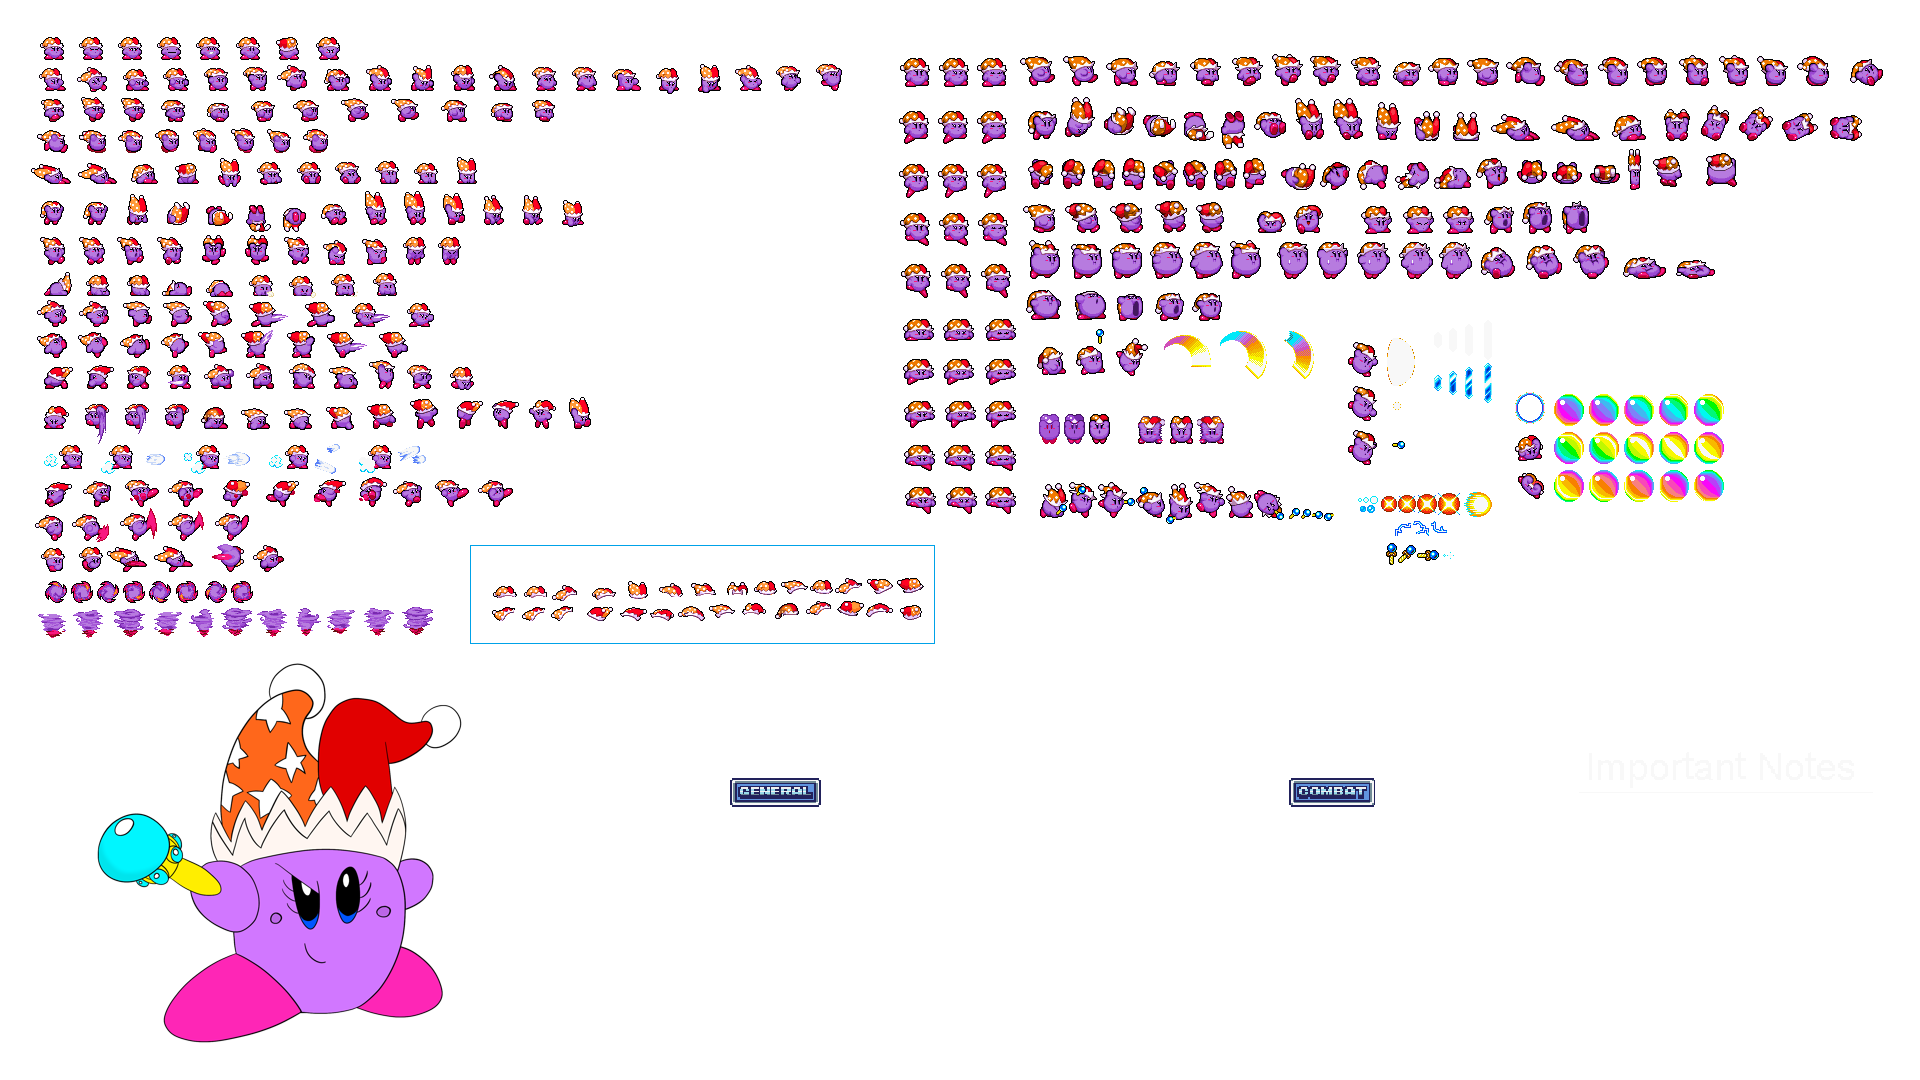 The Spriters Resource - Full Sheet View - Sonic Screensaver - Sonic